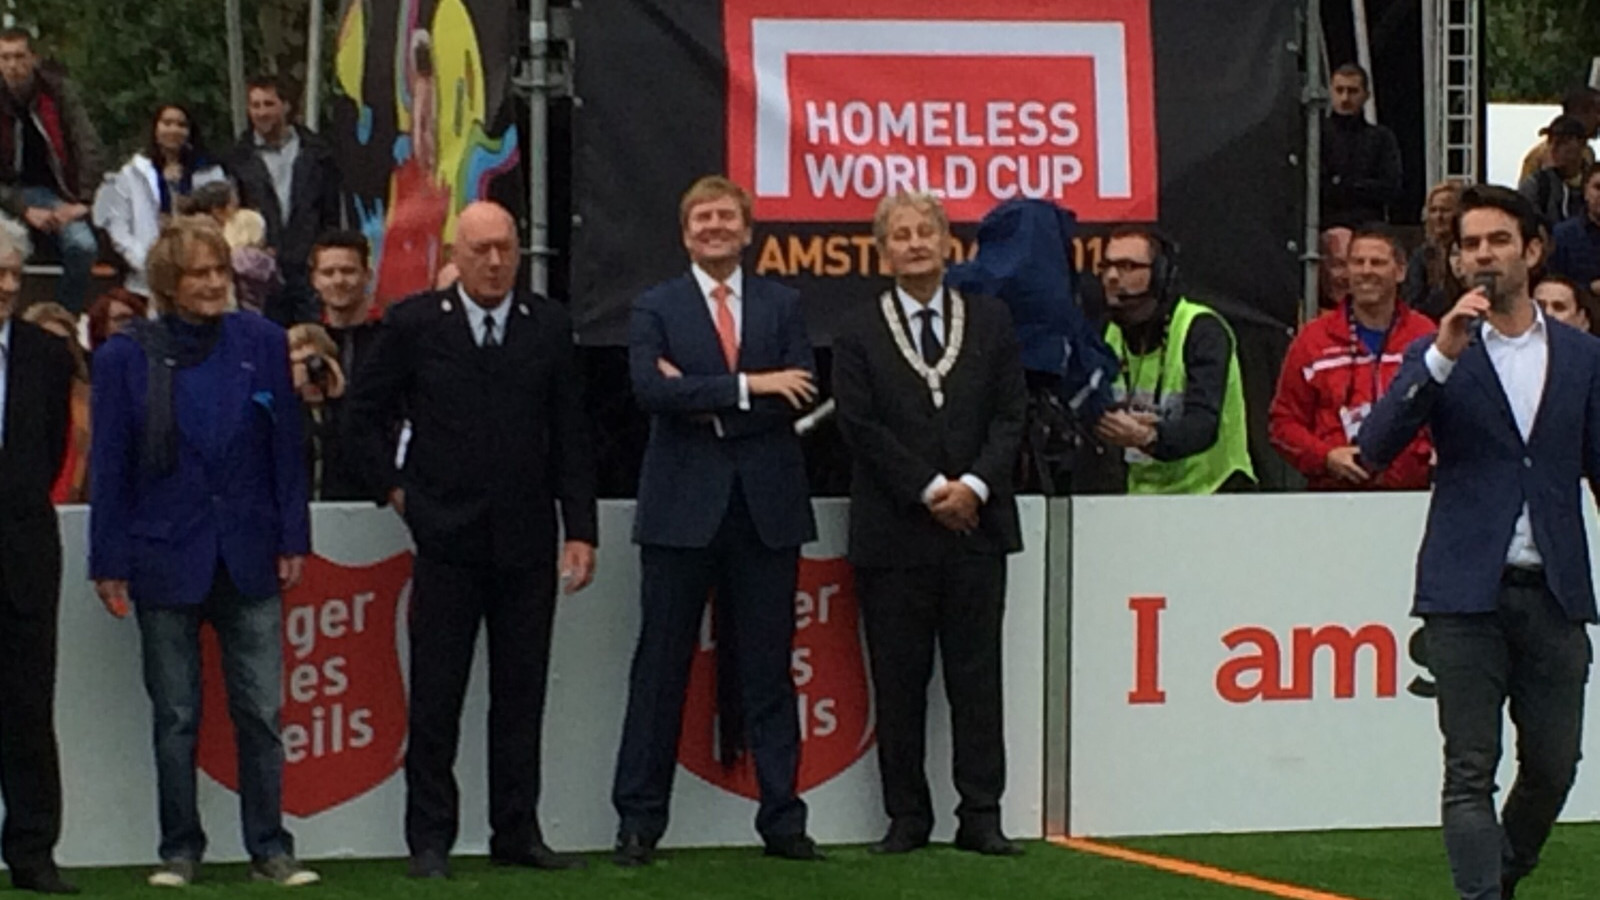 World Homeless Cup - opening